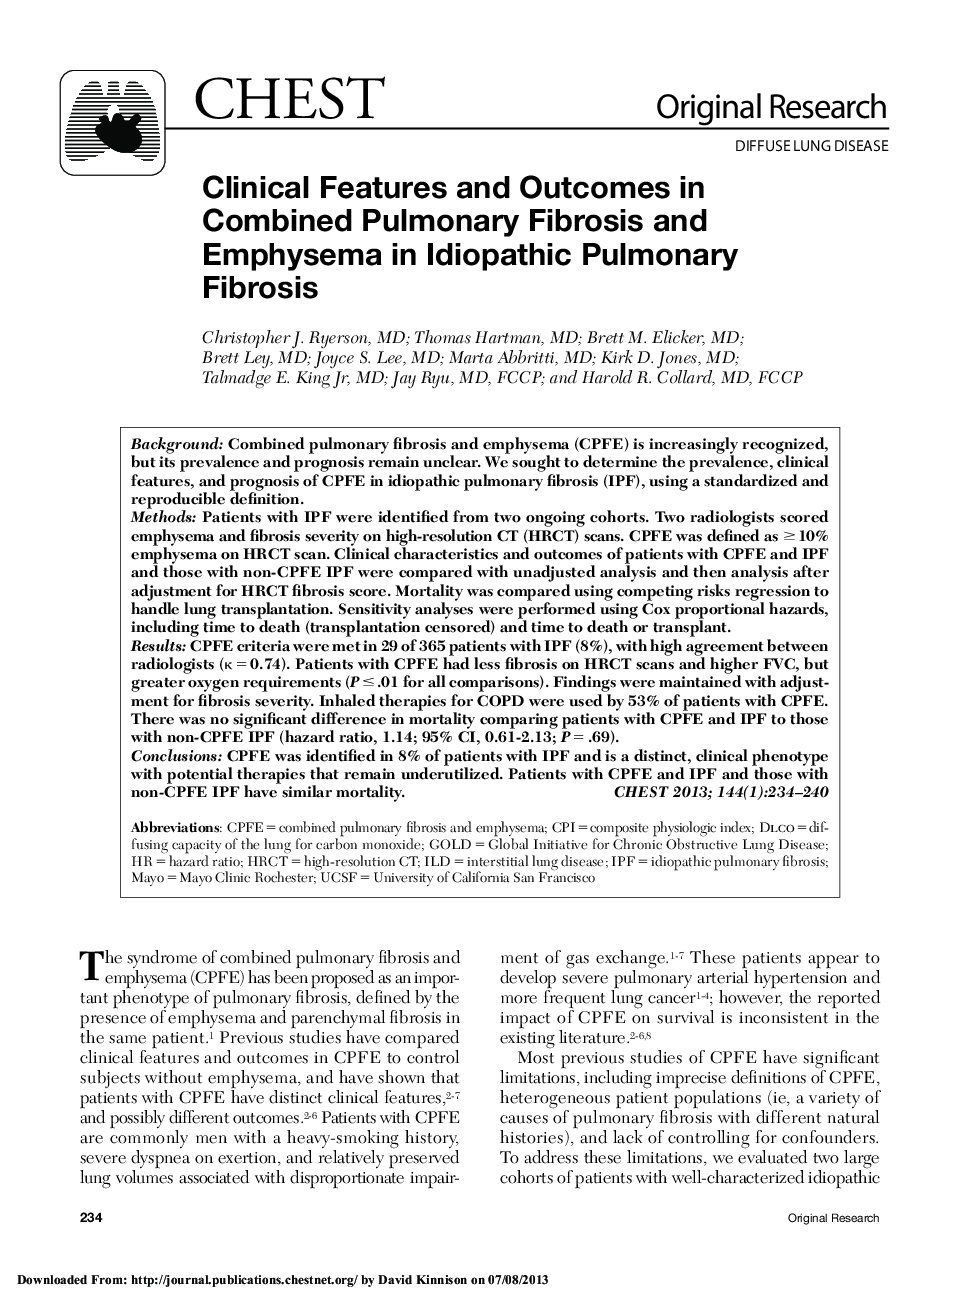 Clinical Features and Outcomes in Combined Pulmonary Fibrosis and Emphysema in Idiopathic Pulmonary Fibrosis